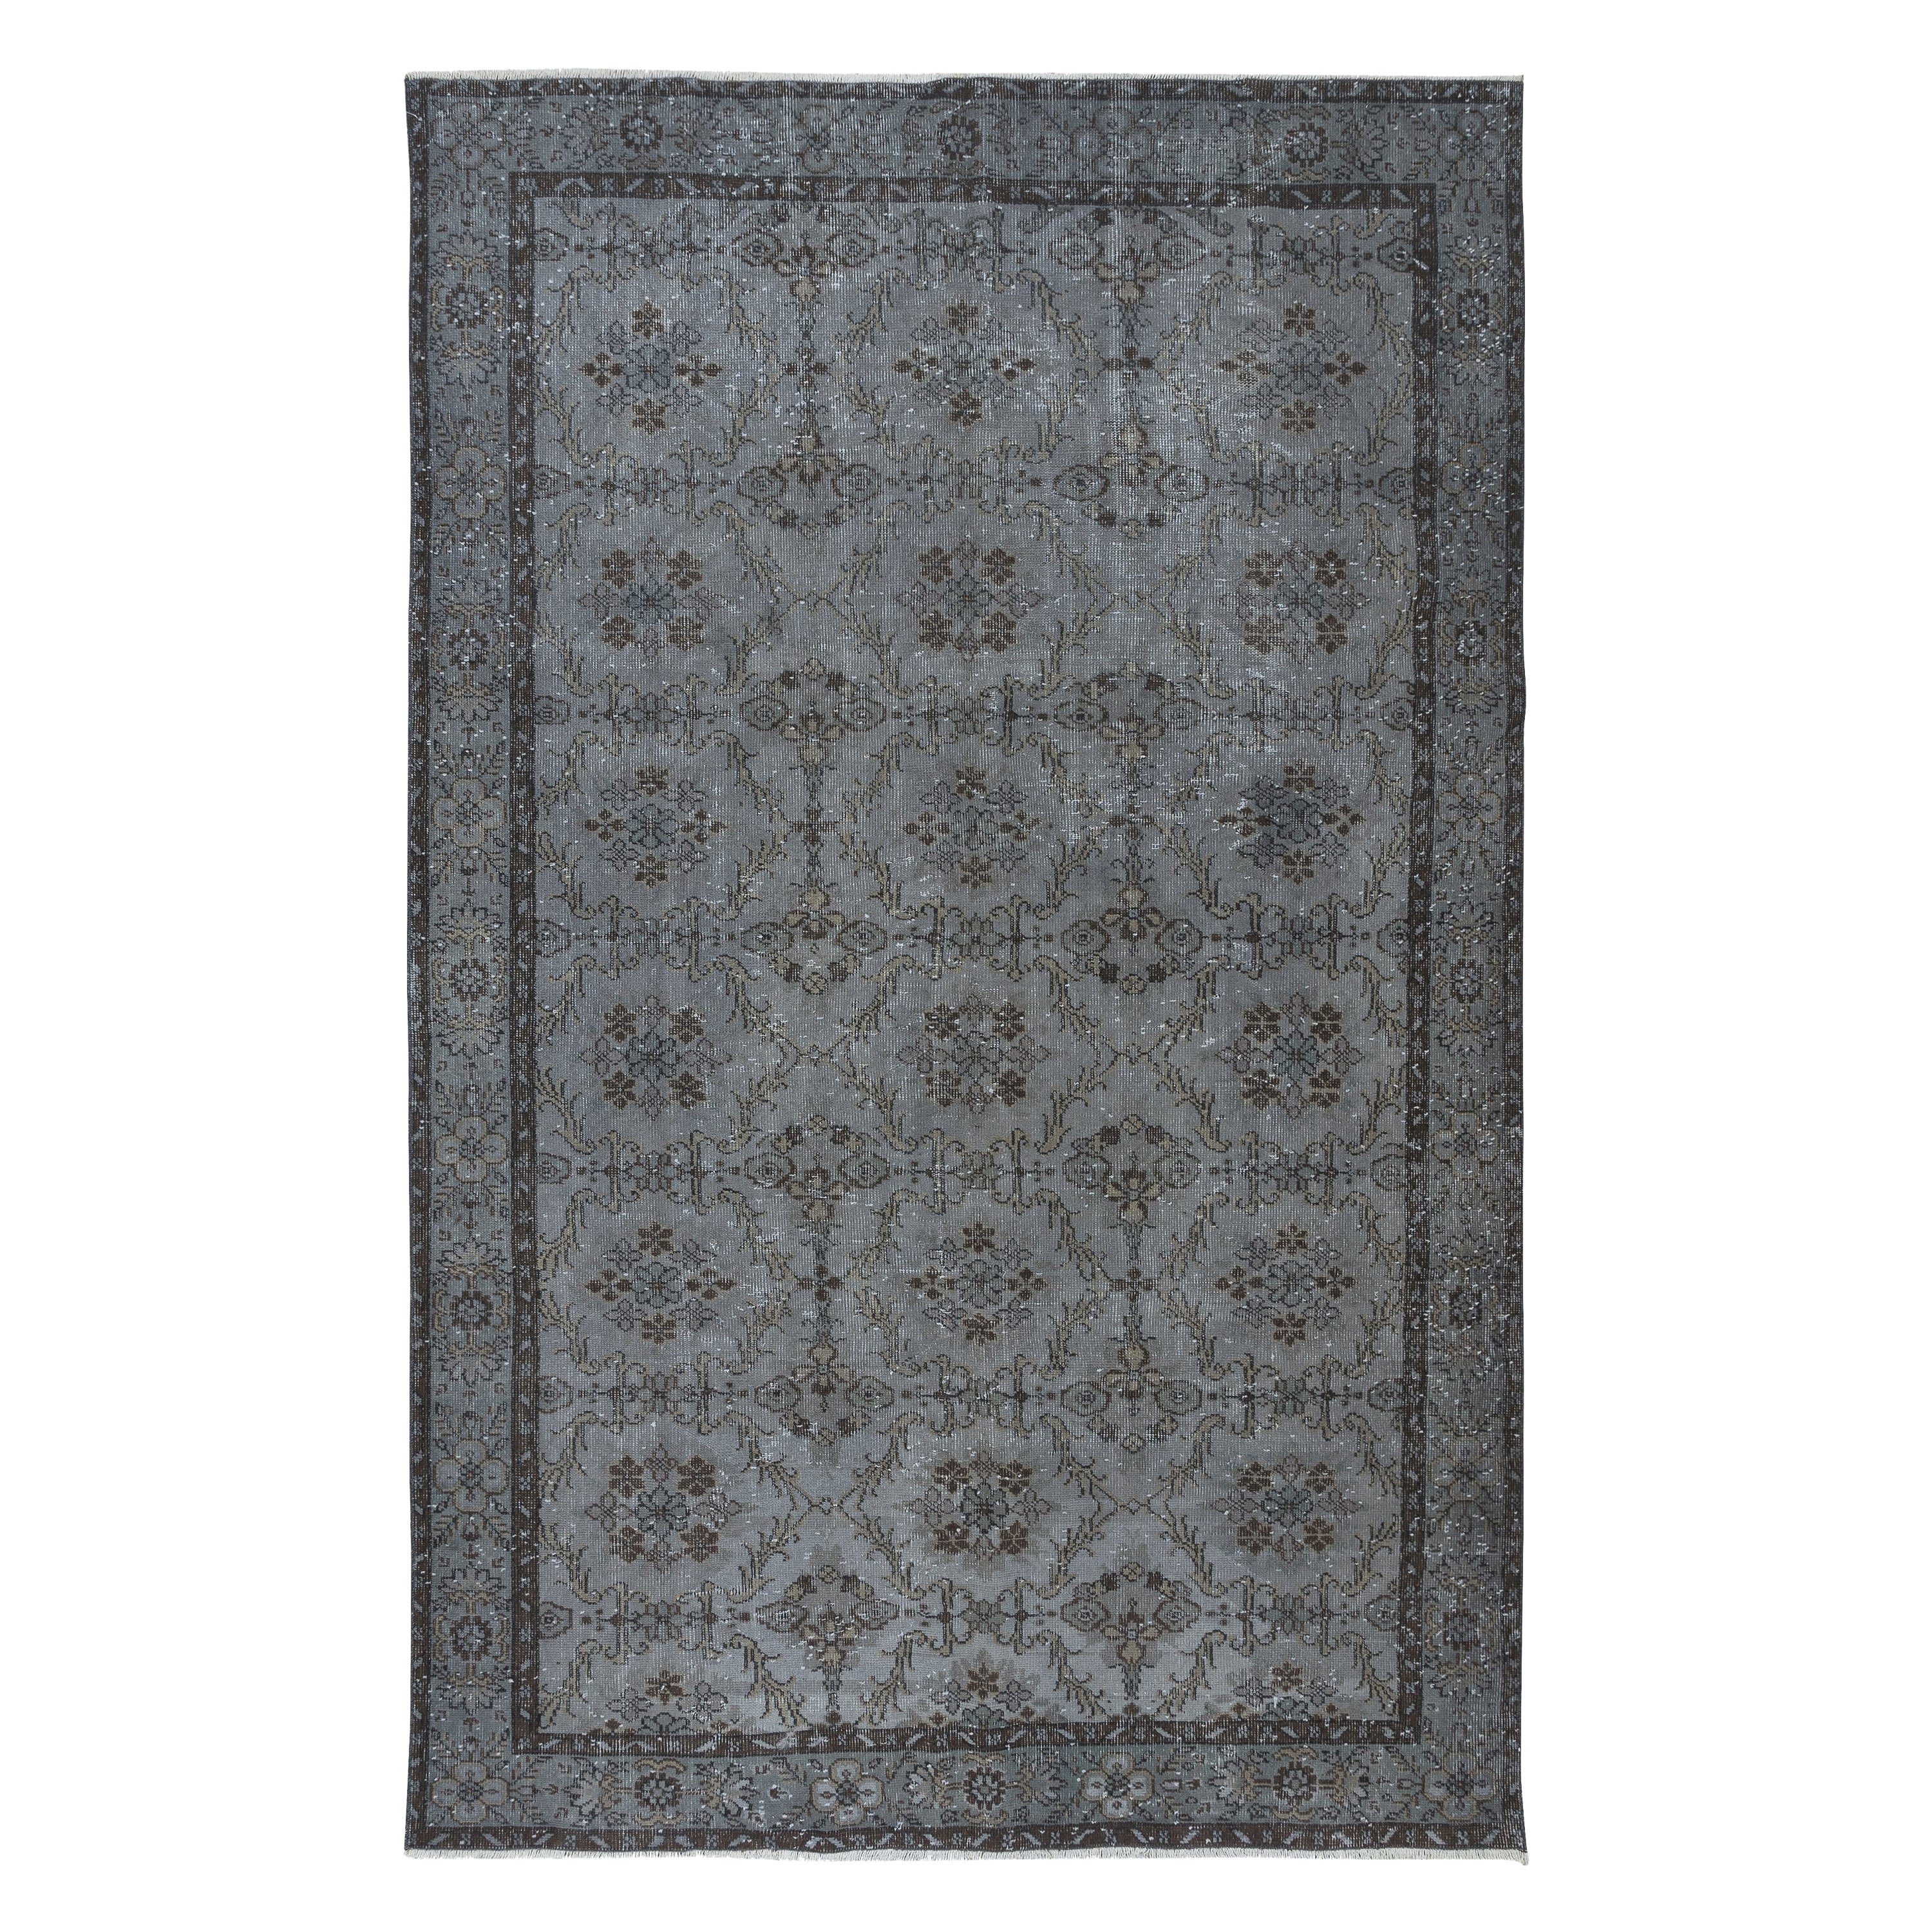 6.4x9.8 Ft Handmade Turkish Rug with Botanical Design and Gray Background For Sale